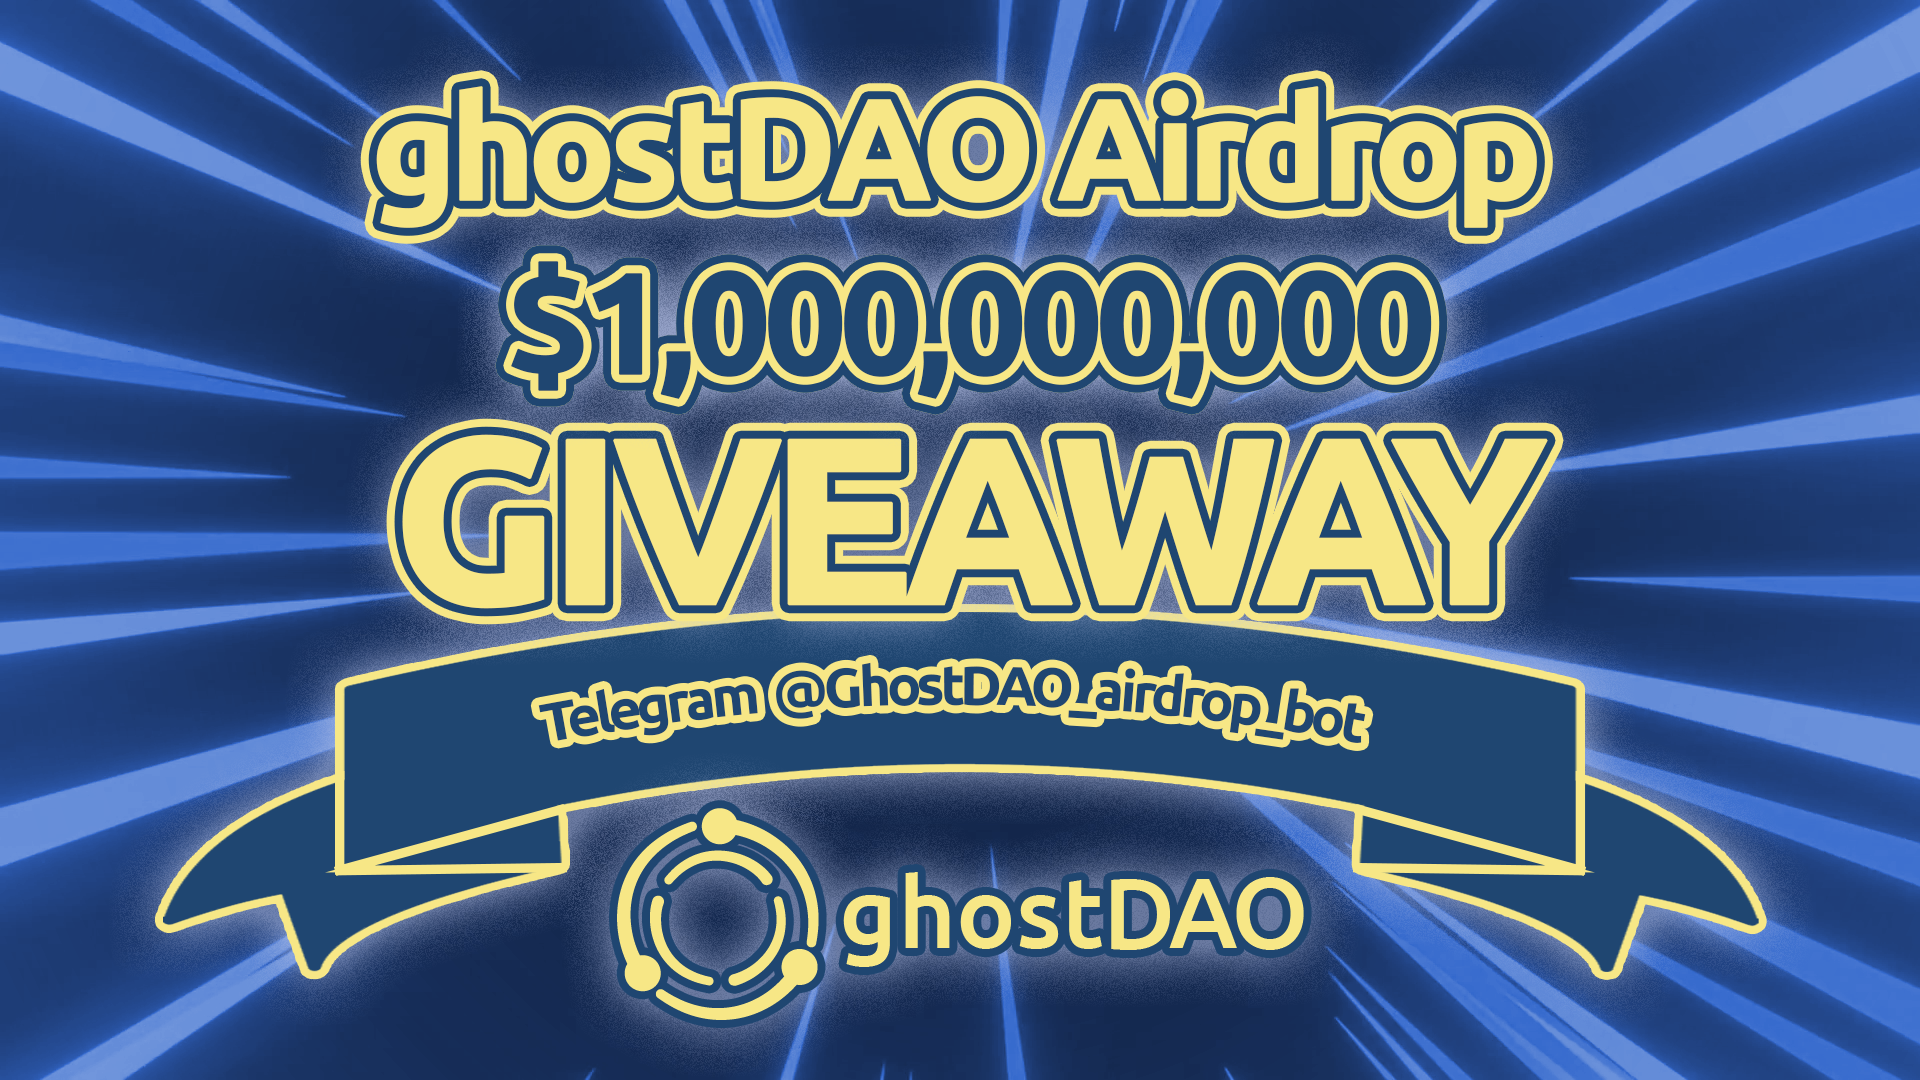 Read more about the article ghostDAO Airdrop $1,000,000,000 Giveaway